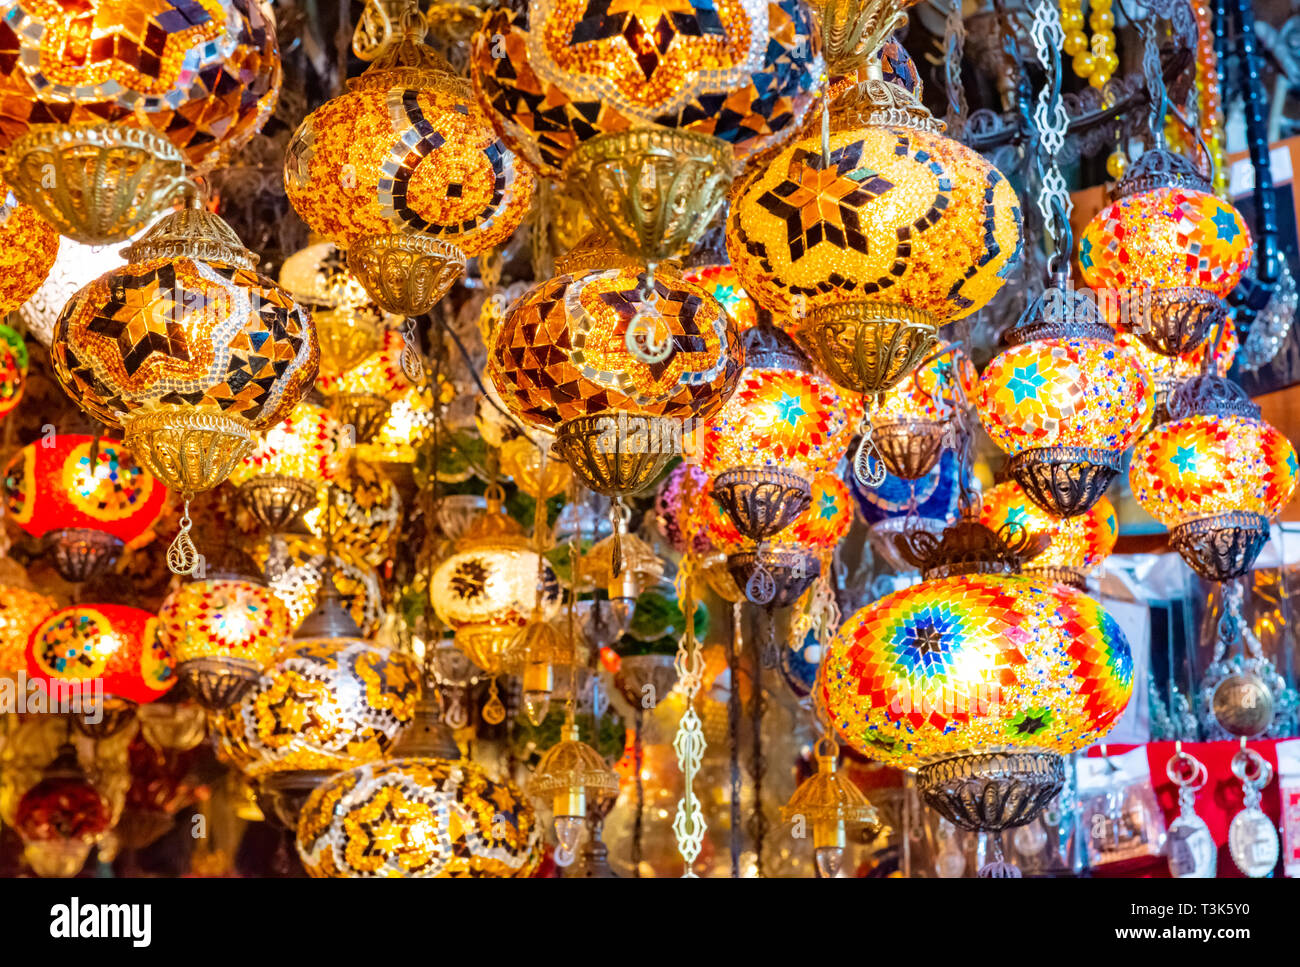 Multicolored authentic lamps hanging at the Grand Bazaar in Istanbul, Turkey Stock Photo